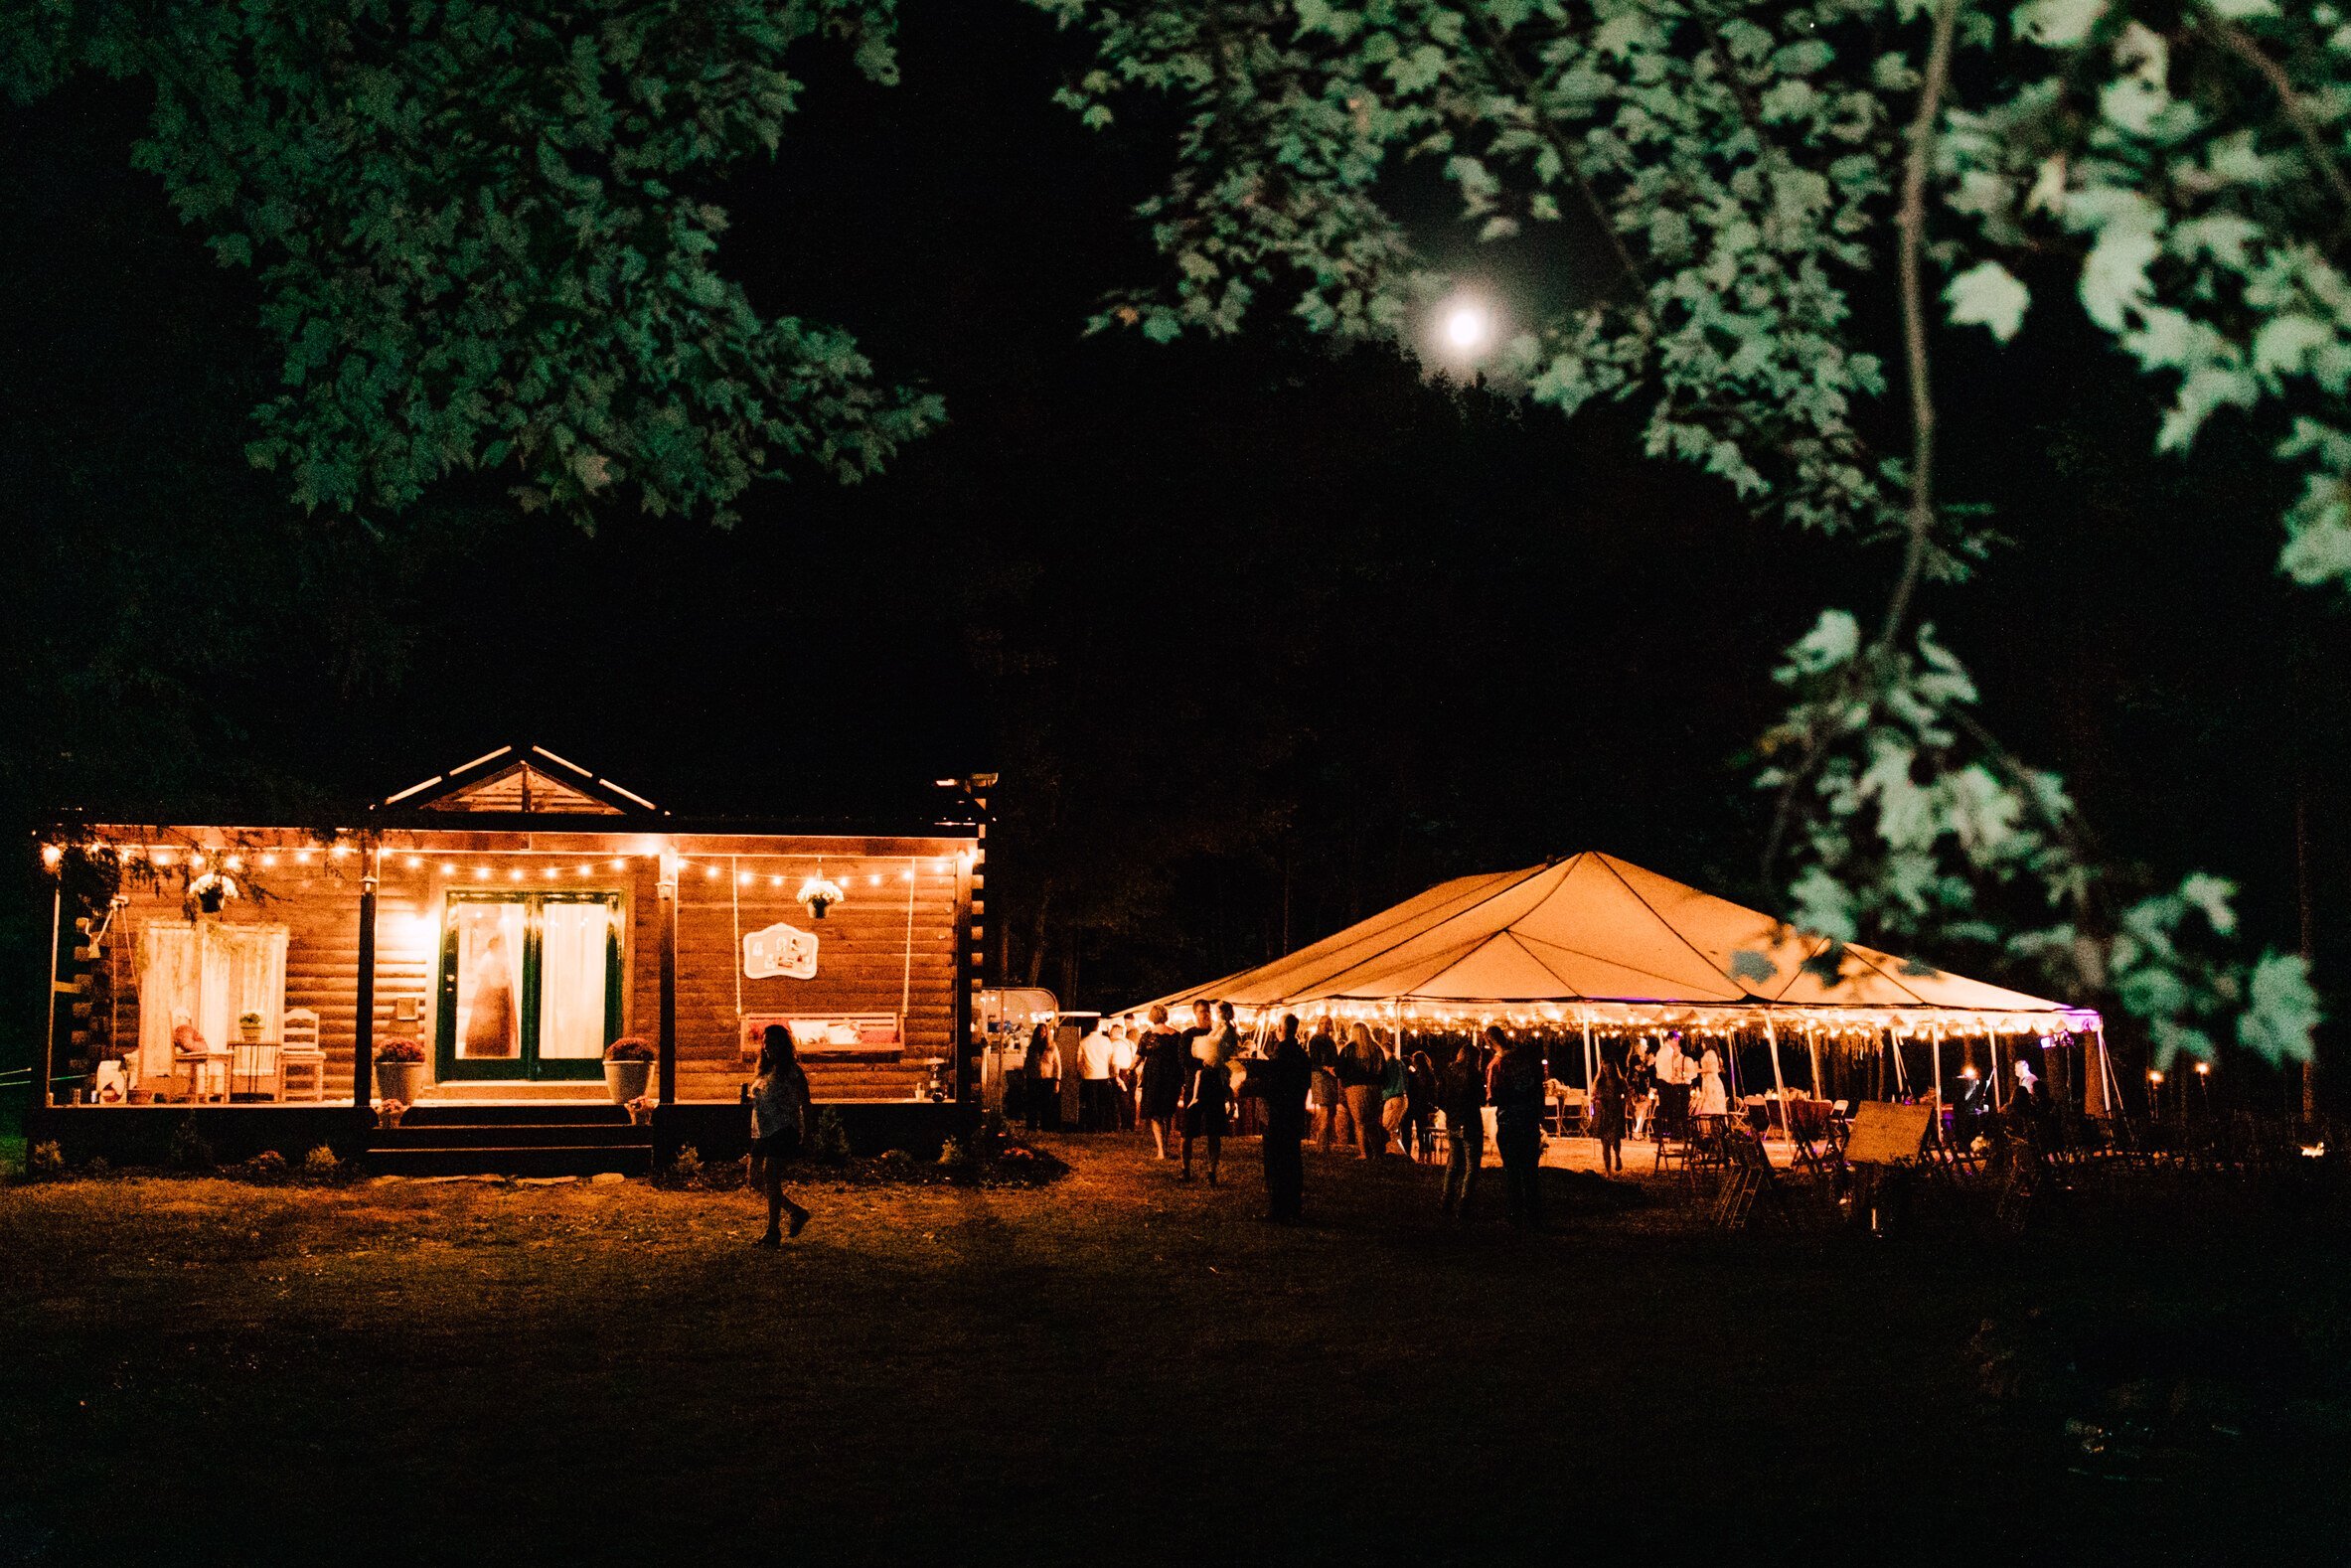  The outdoor fall wedding venue is pictured lit up at night by string lights with guests enjoying the night 